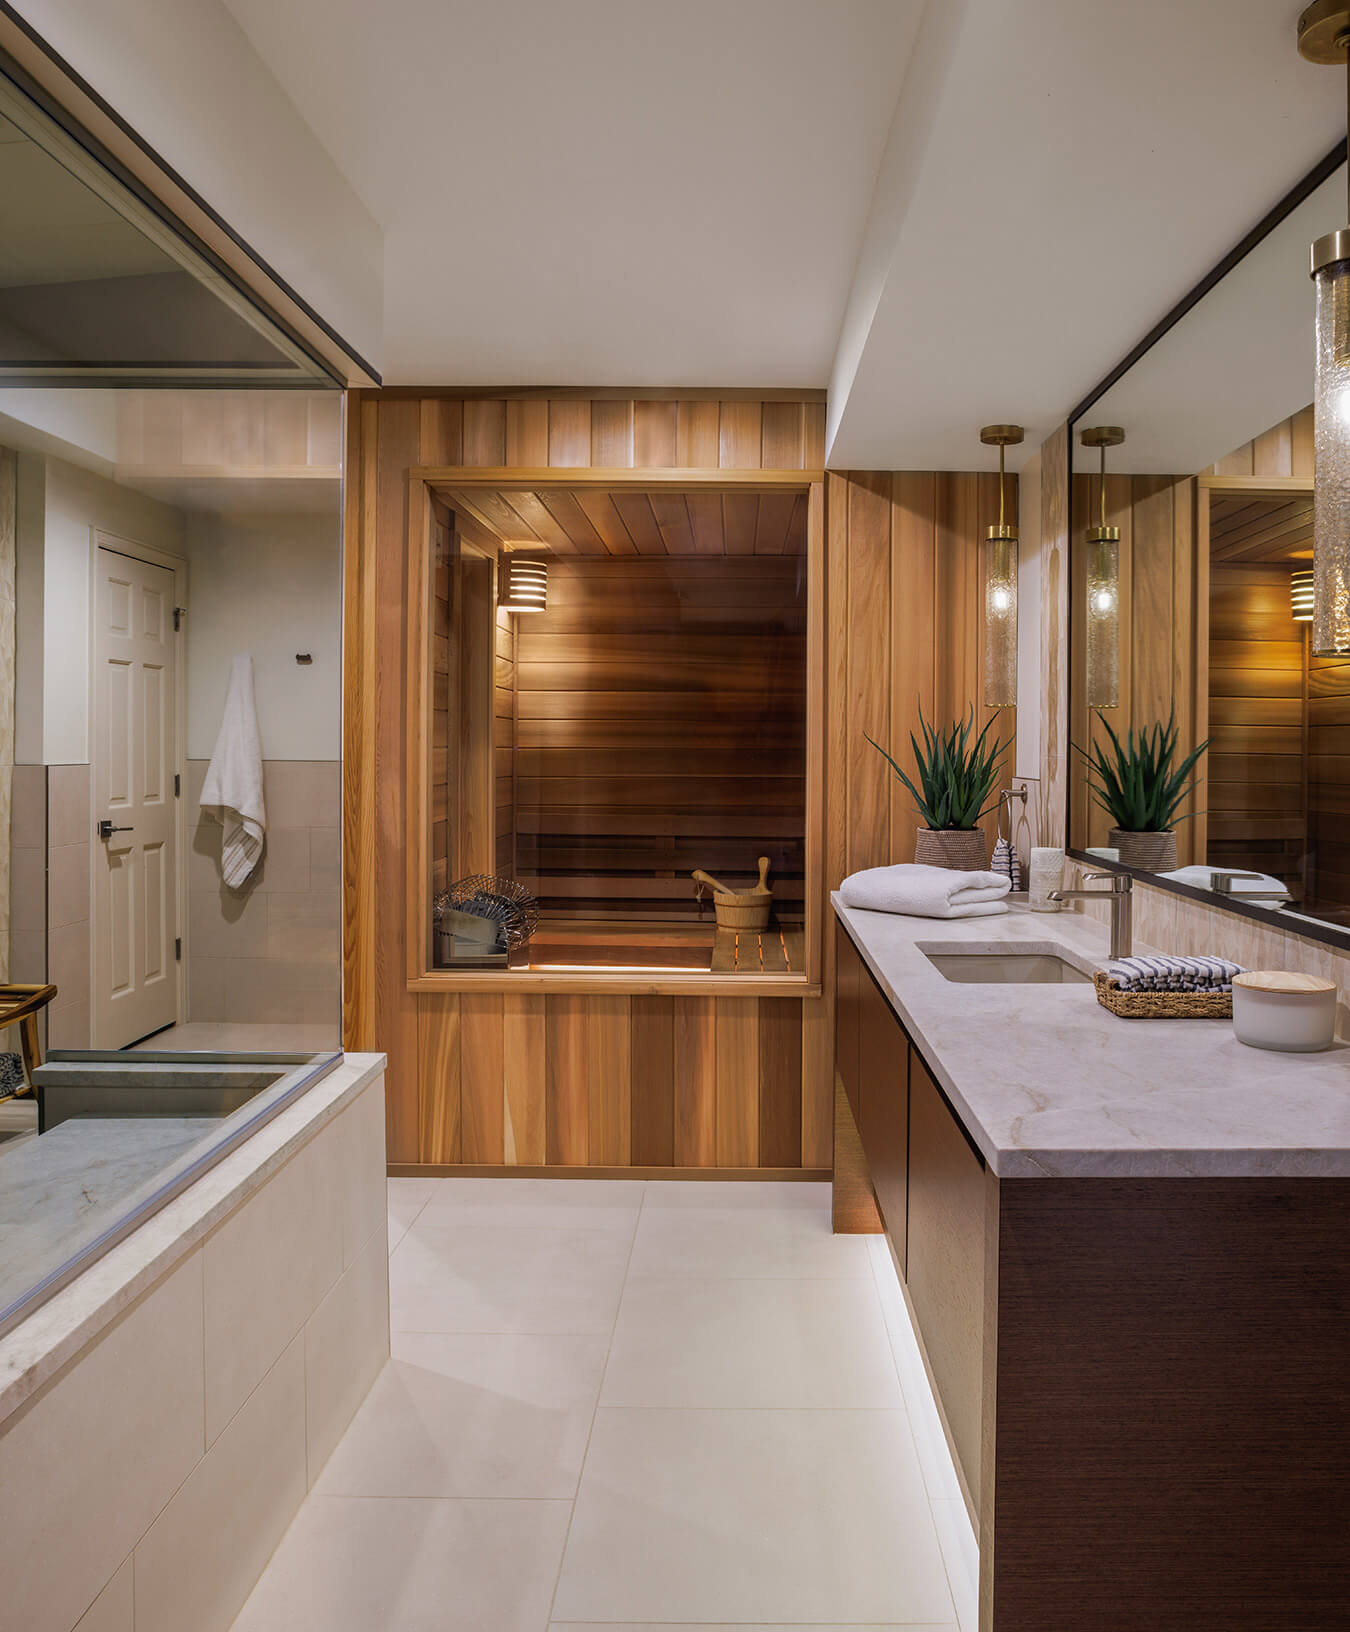 4 Things to Consider Before Your Master Bathroom Remodel